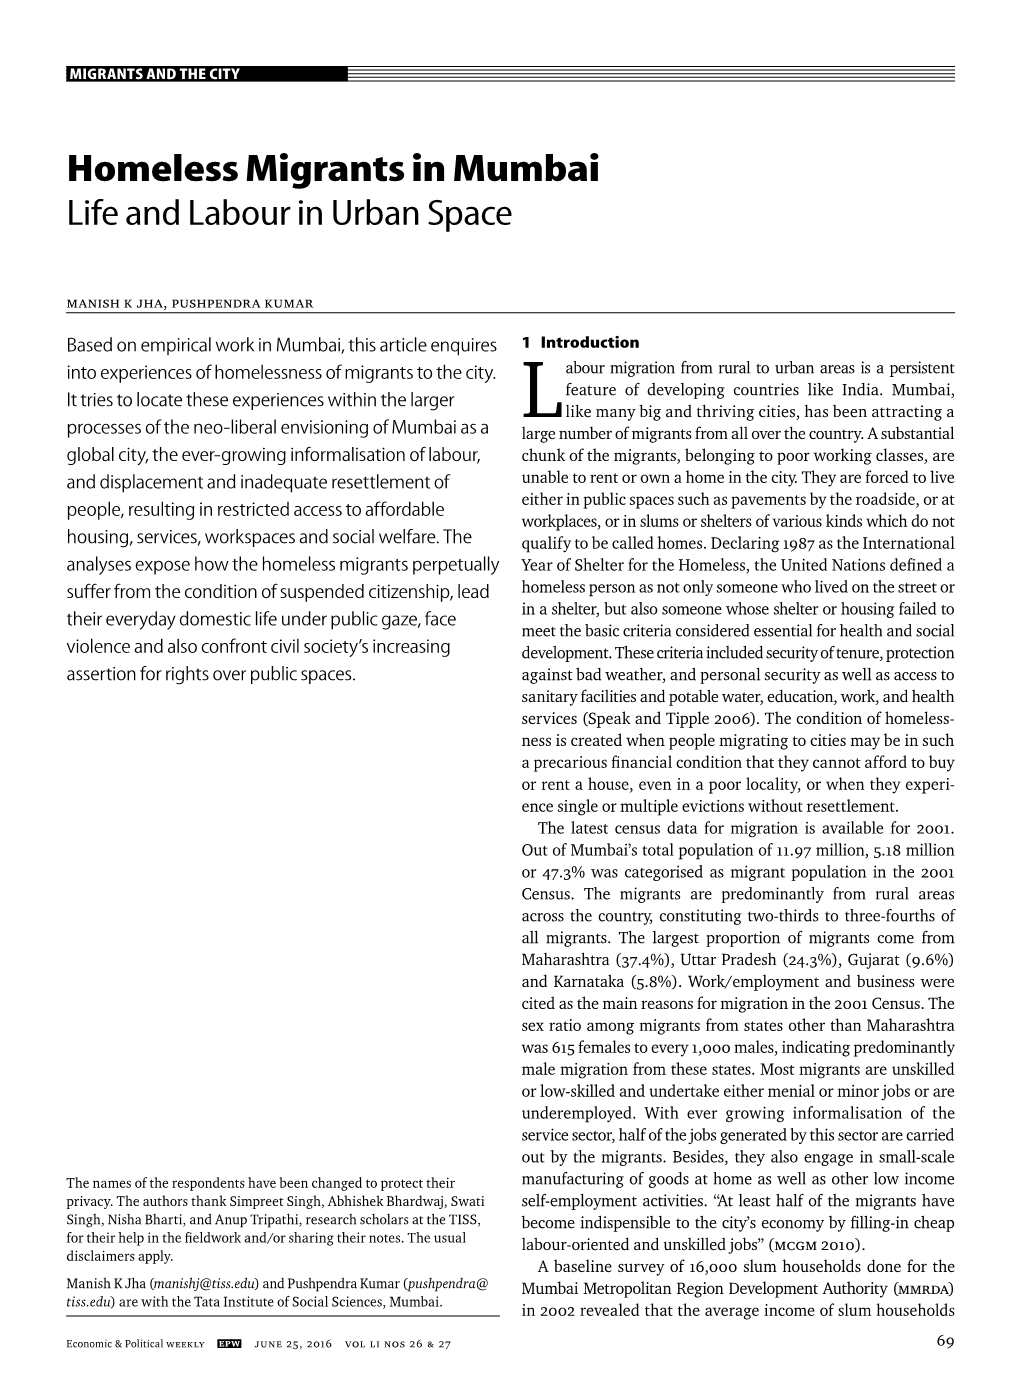 Homeless Migrants in Mumbai Life and Labour in Urban Space